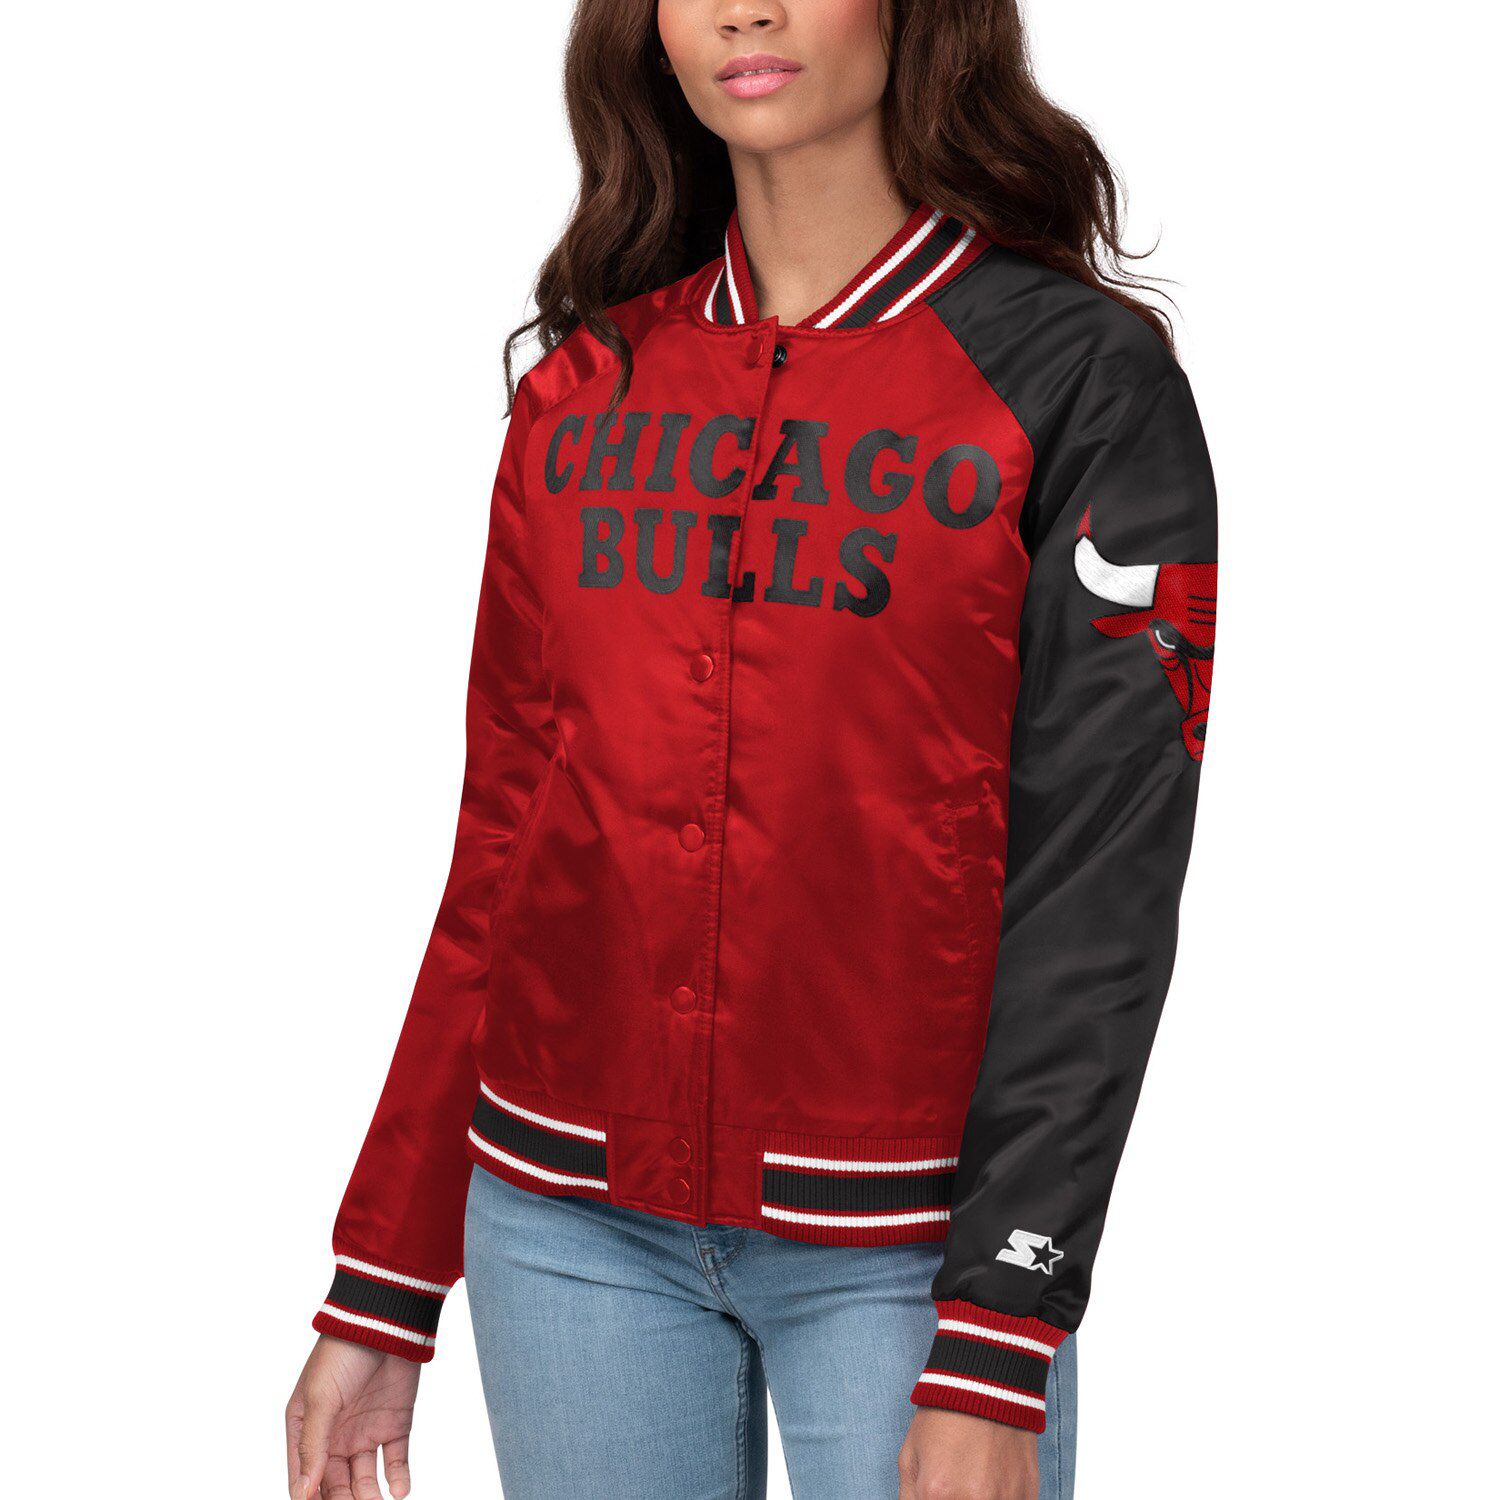 red and black chicago bulls jacket